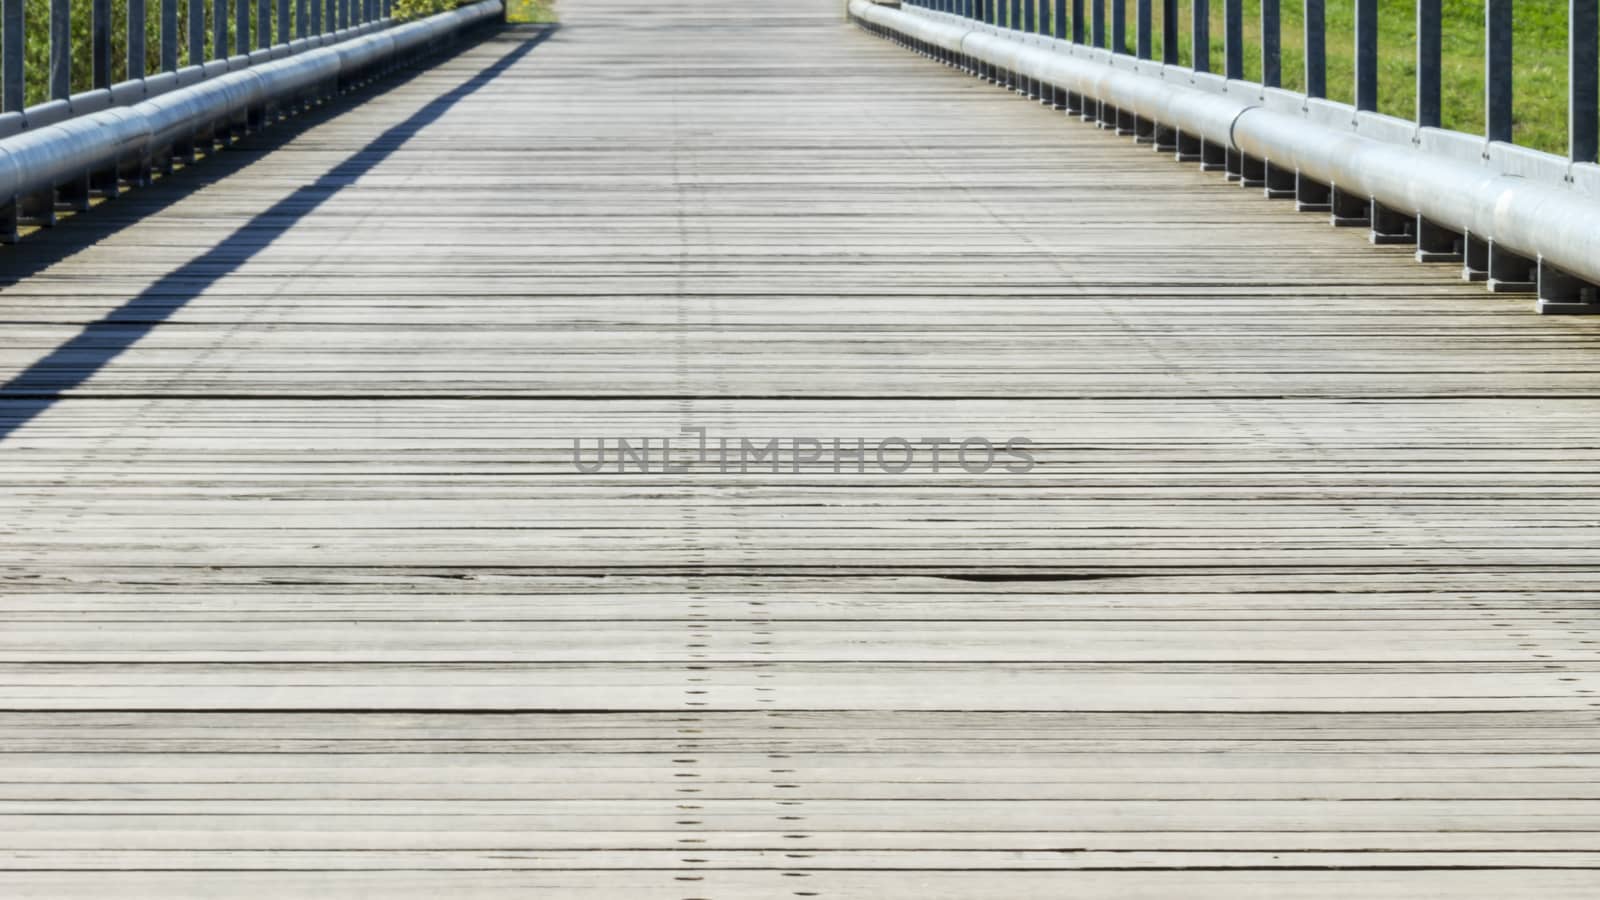 Bridge over a river - National Park on the Elbe